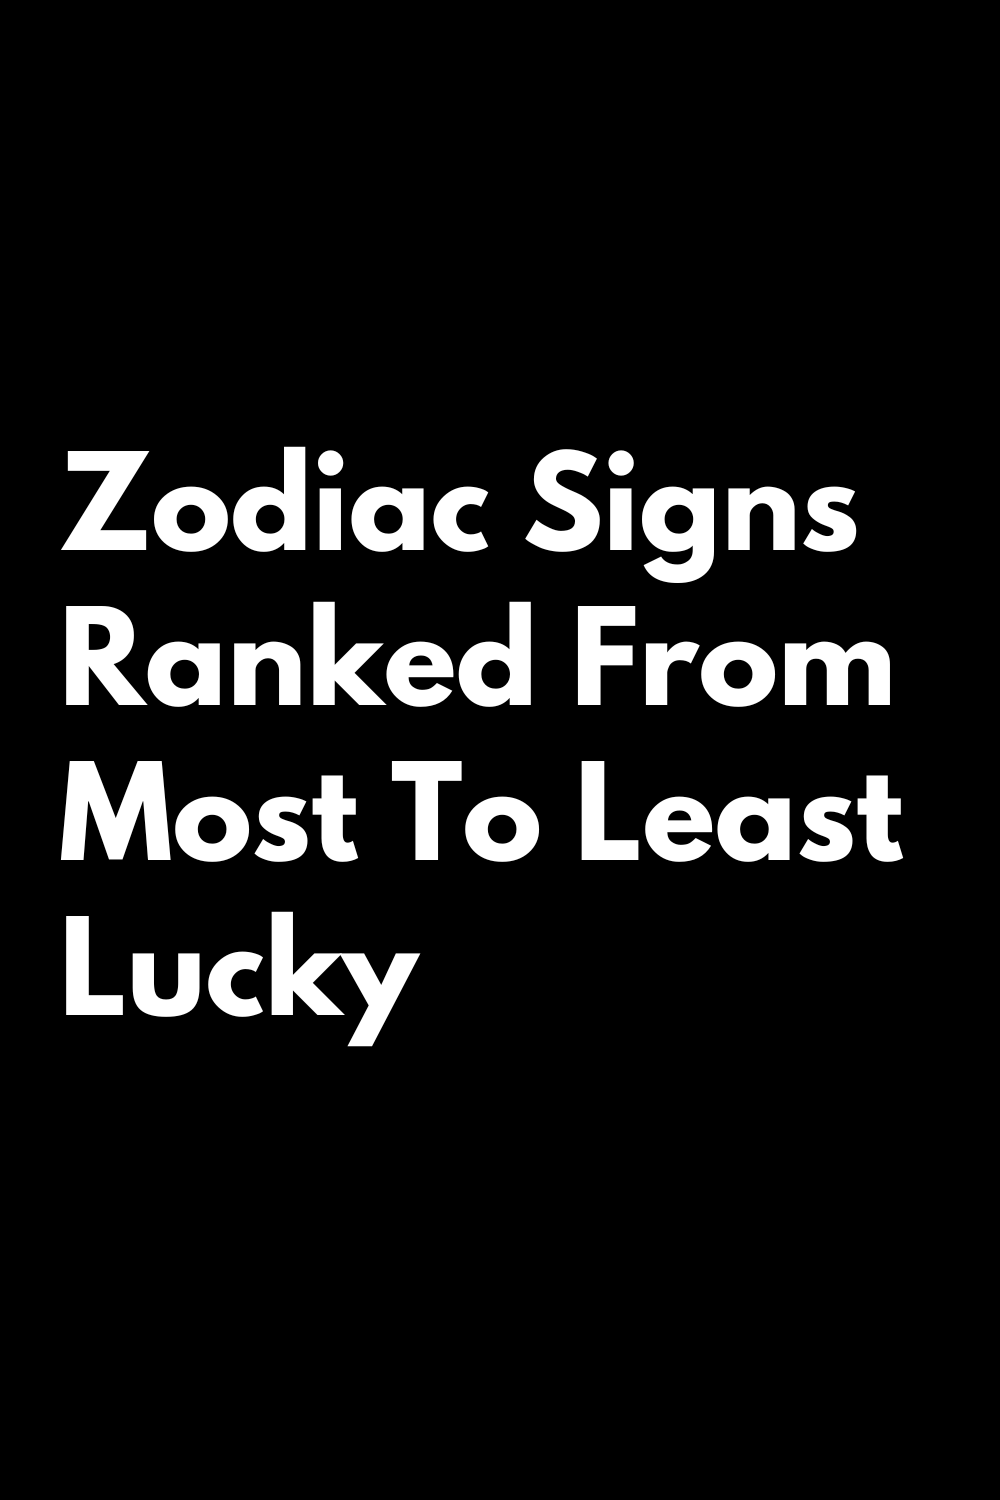 Zodiac Signs Ranked From Most To Least Lucky In 2022 | zodiac Signs